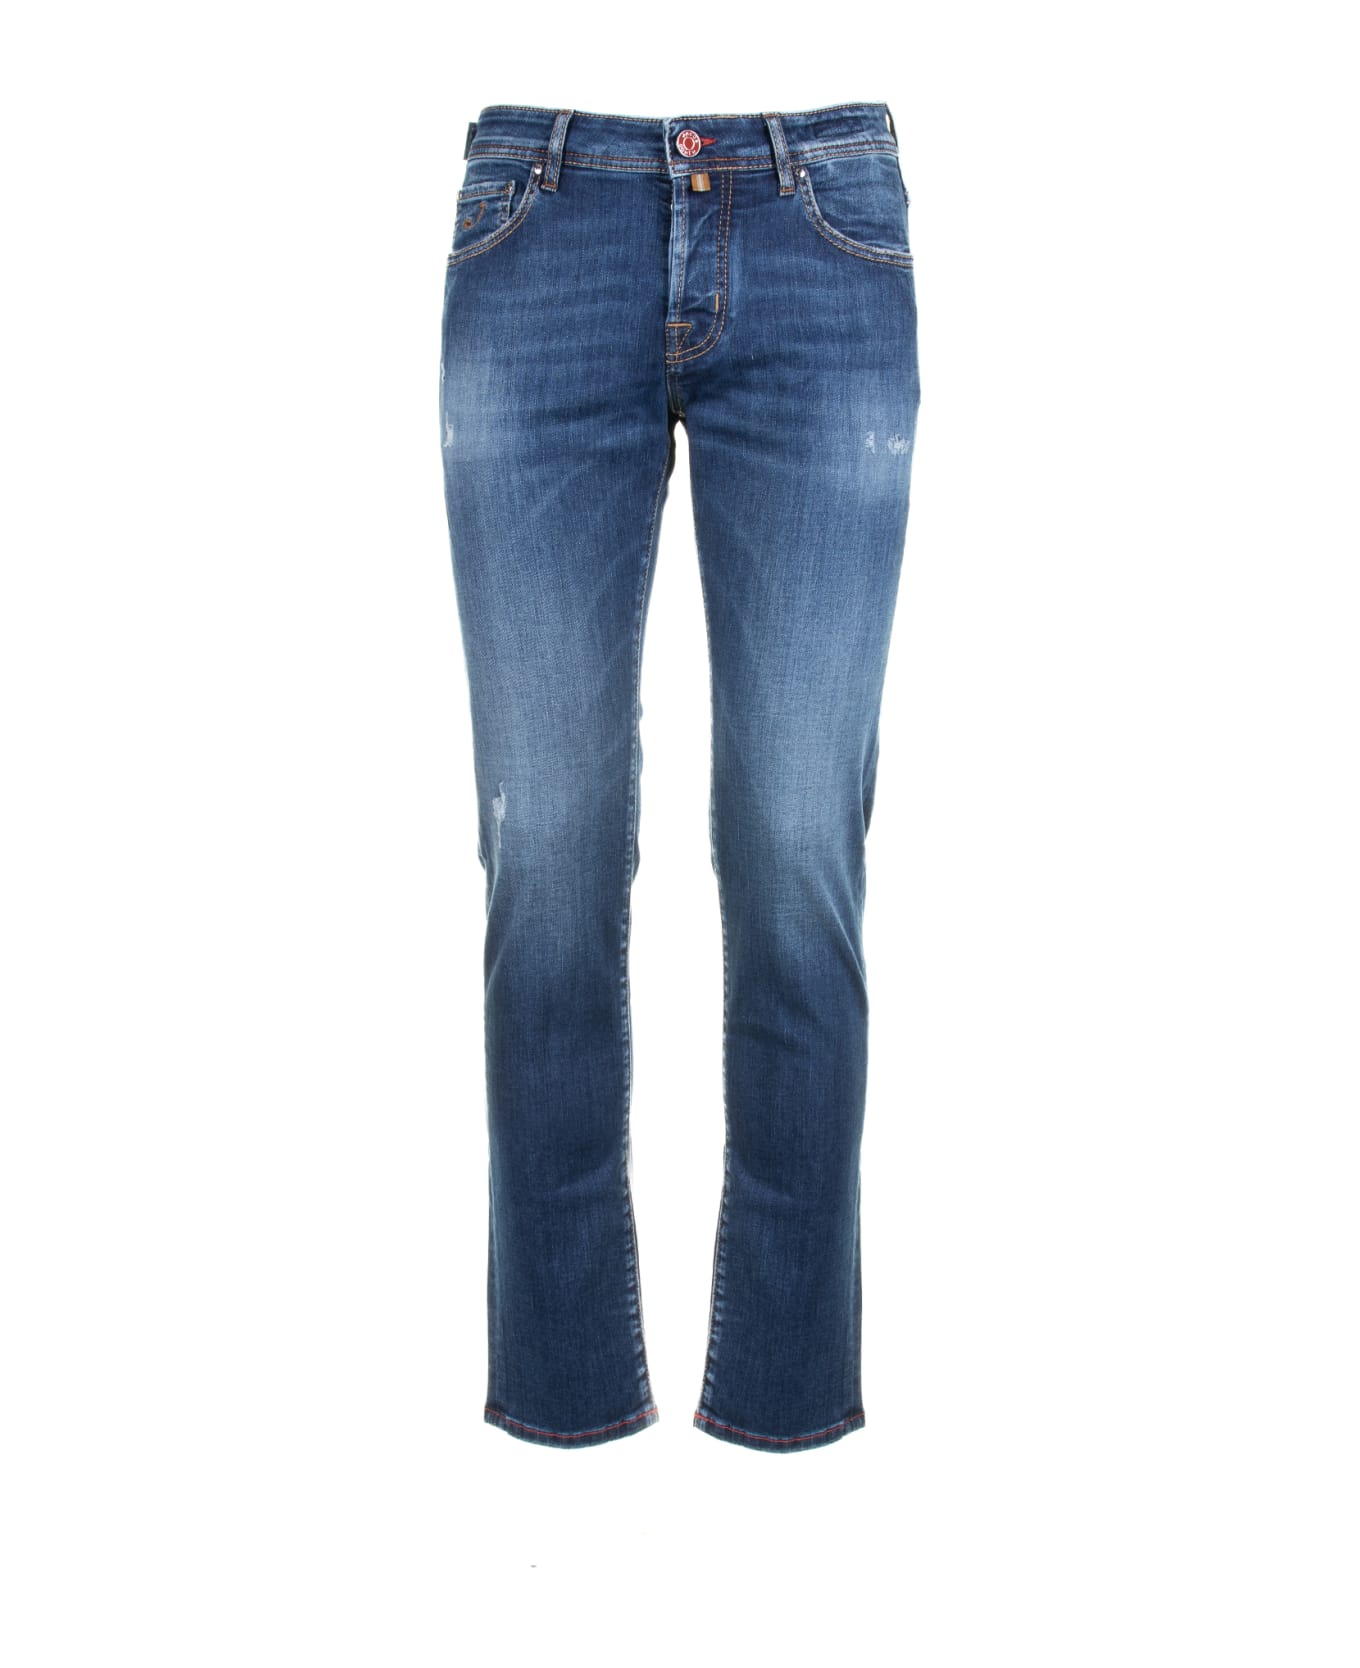 Jacob Cohen Jeans In Blue Denim With Small Tears - BLU INTERMEDIO